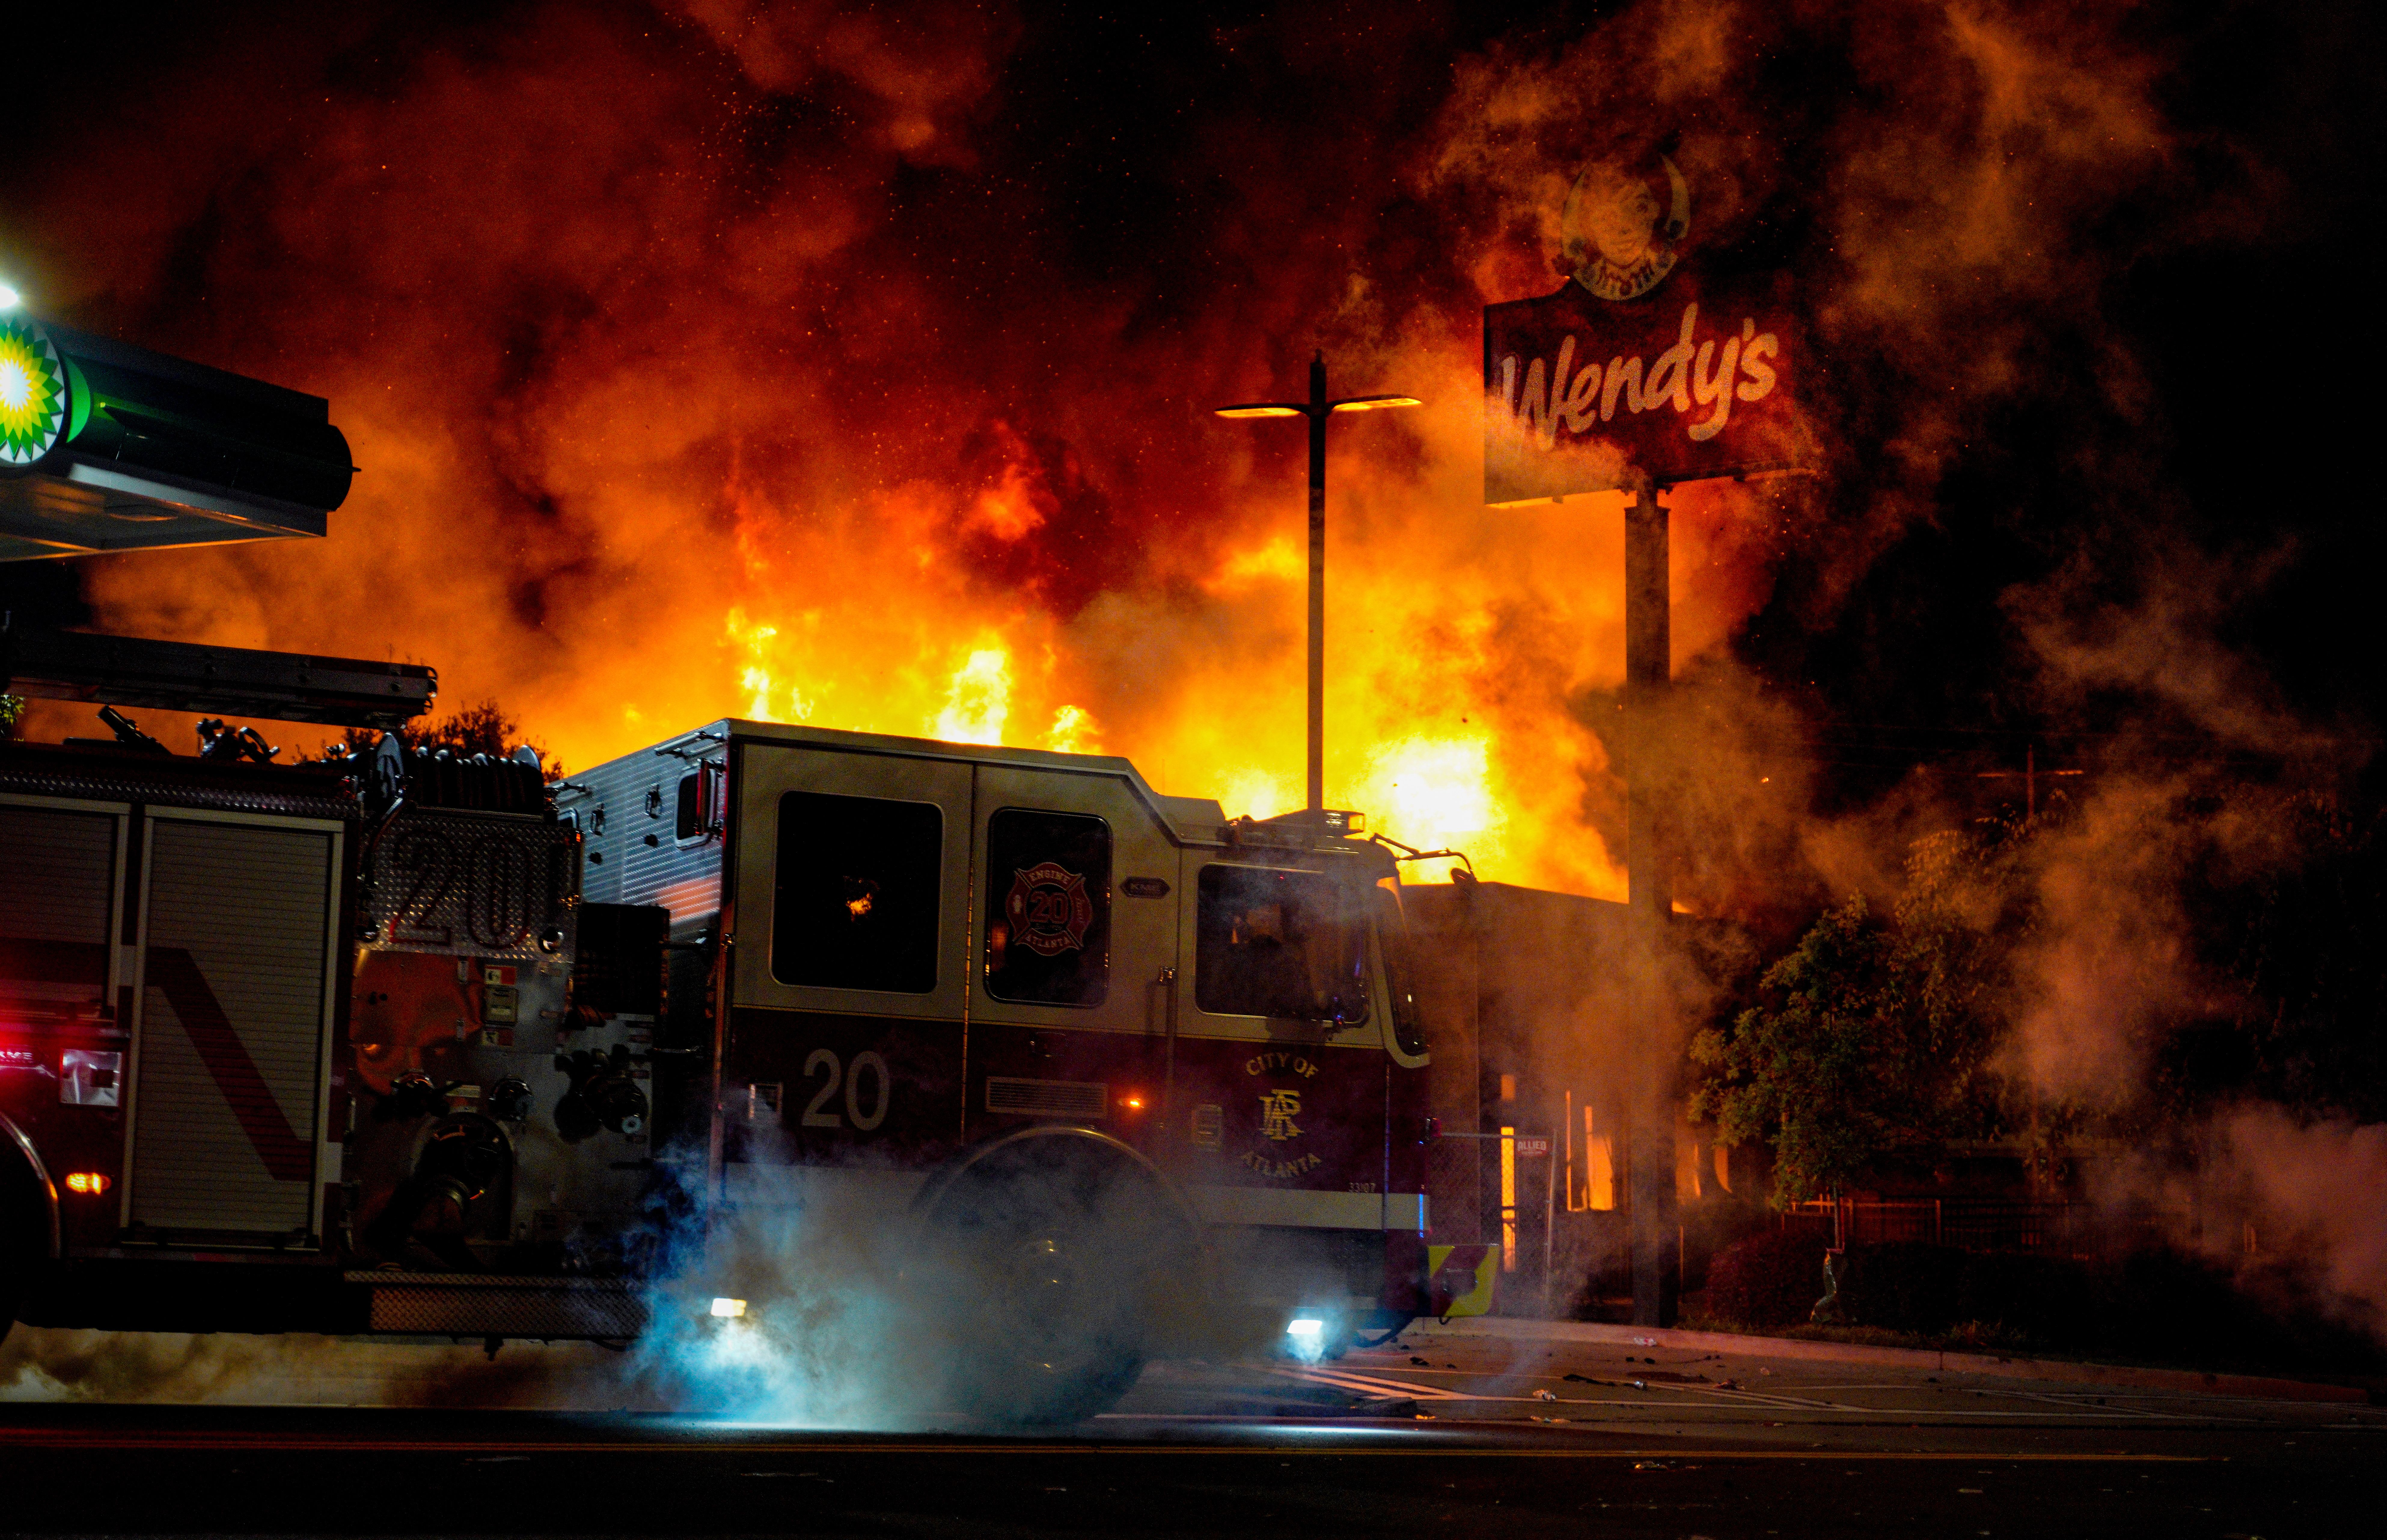 Wendy's on fire